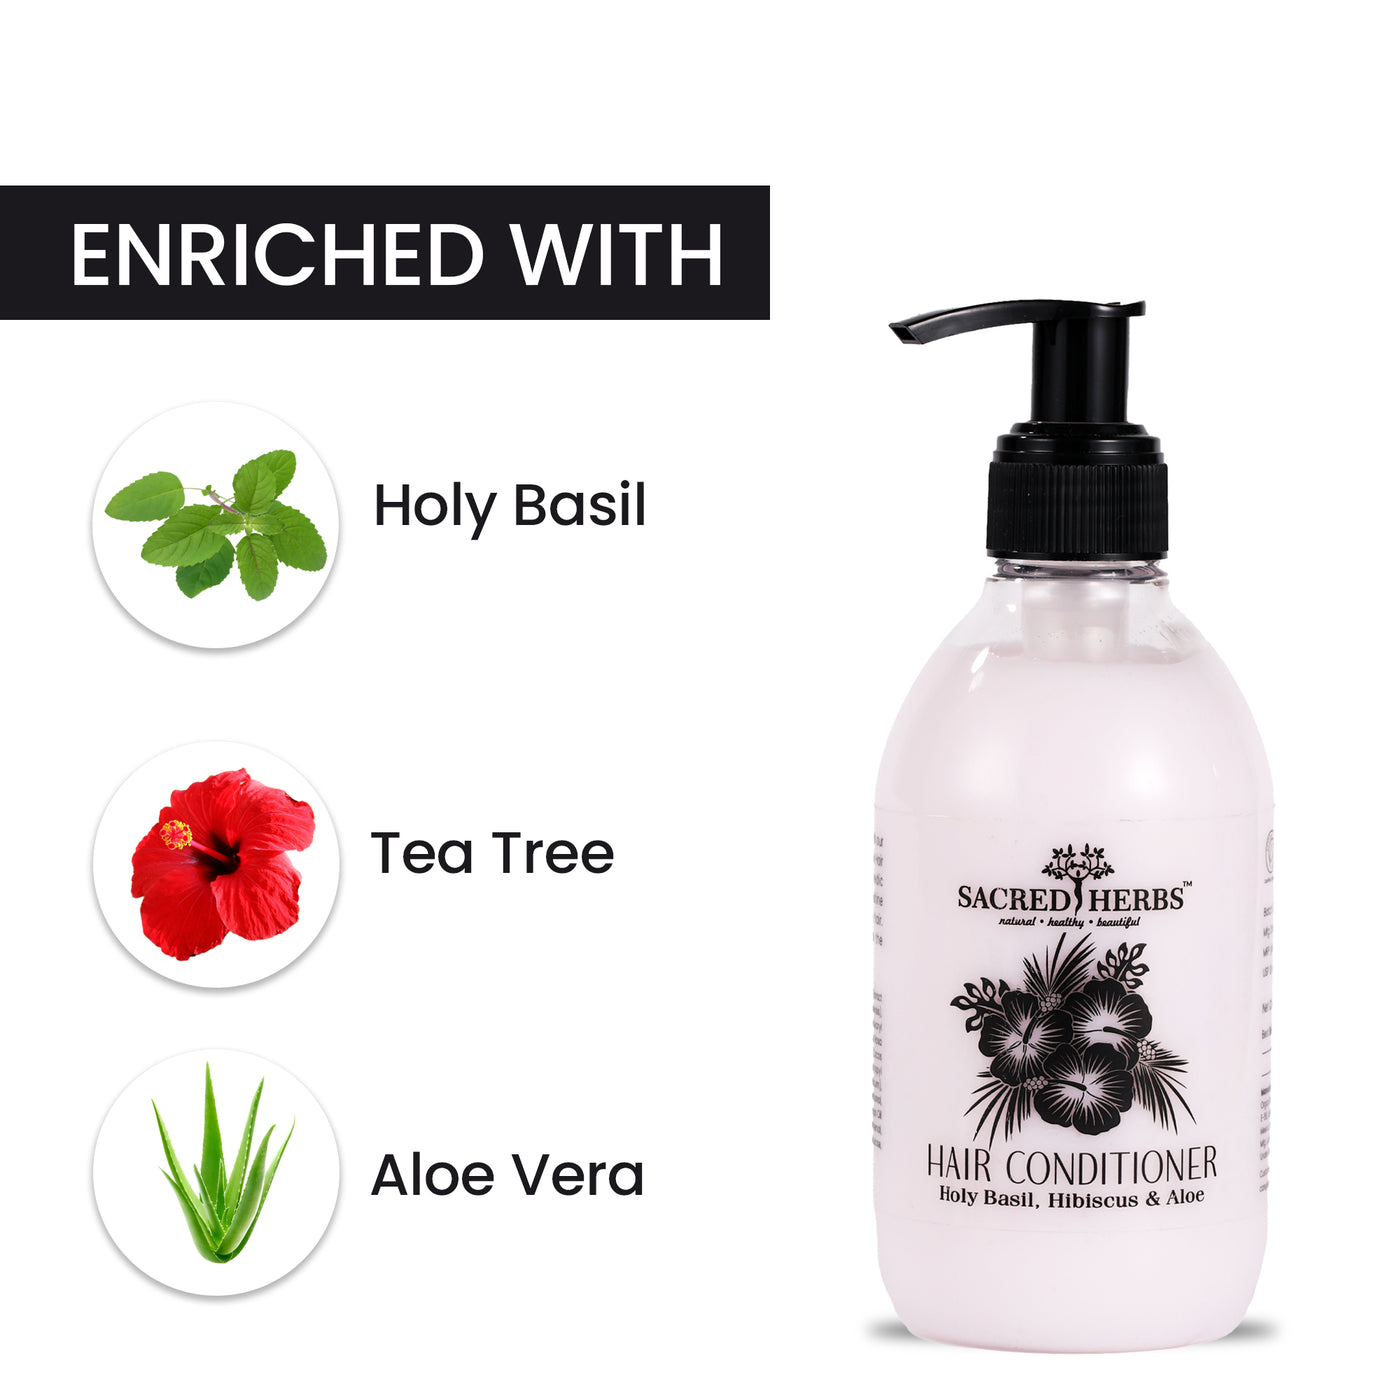 Hair Conditioner- Holy Basil, Hibiscus & Aloe